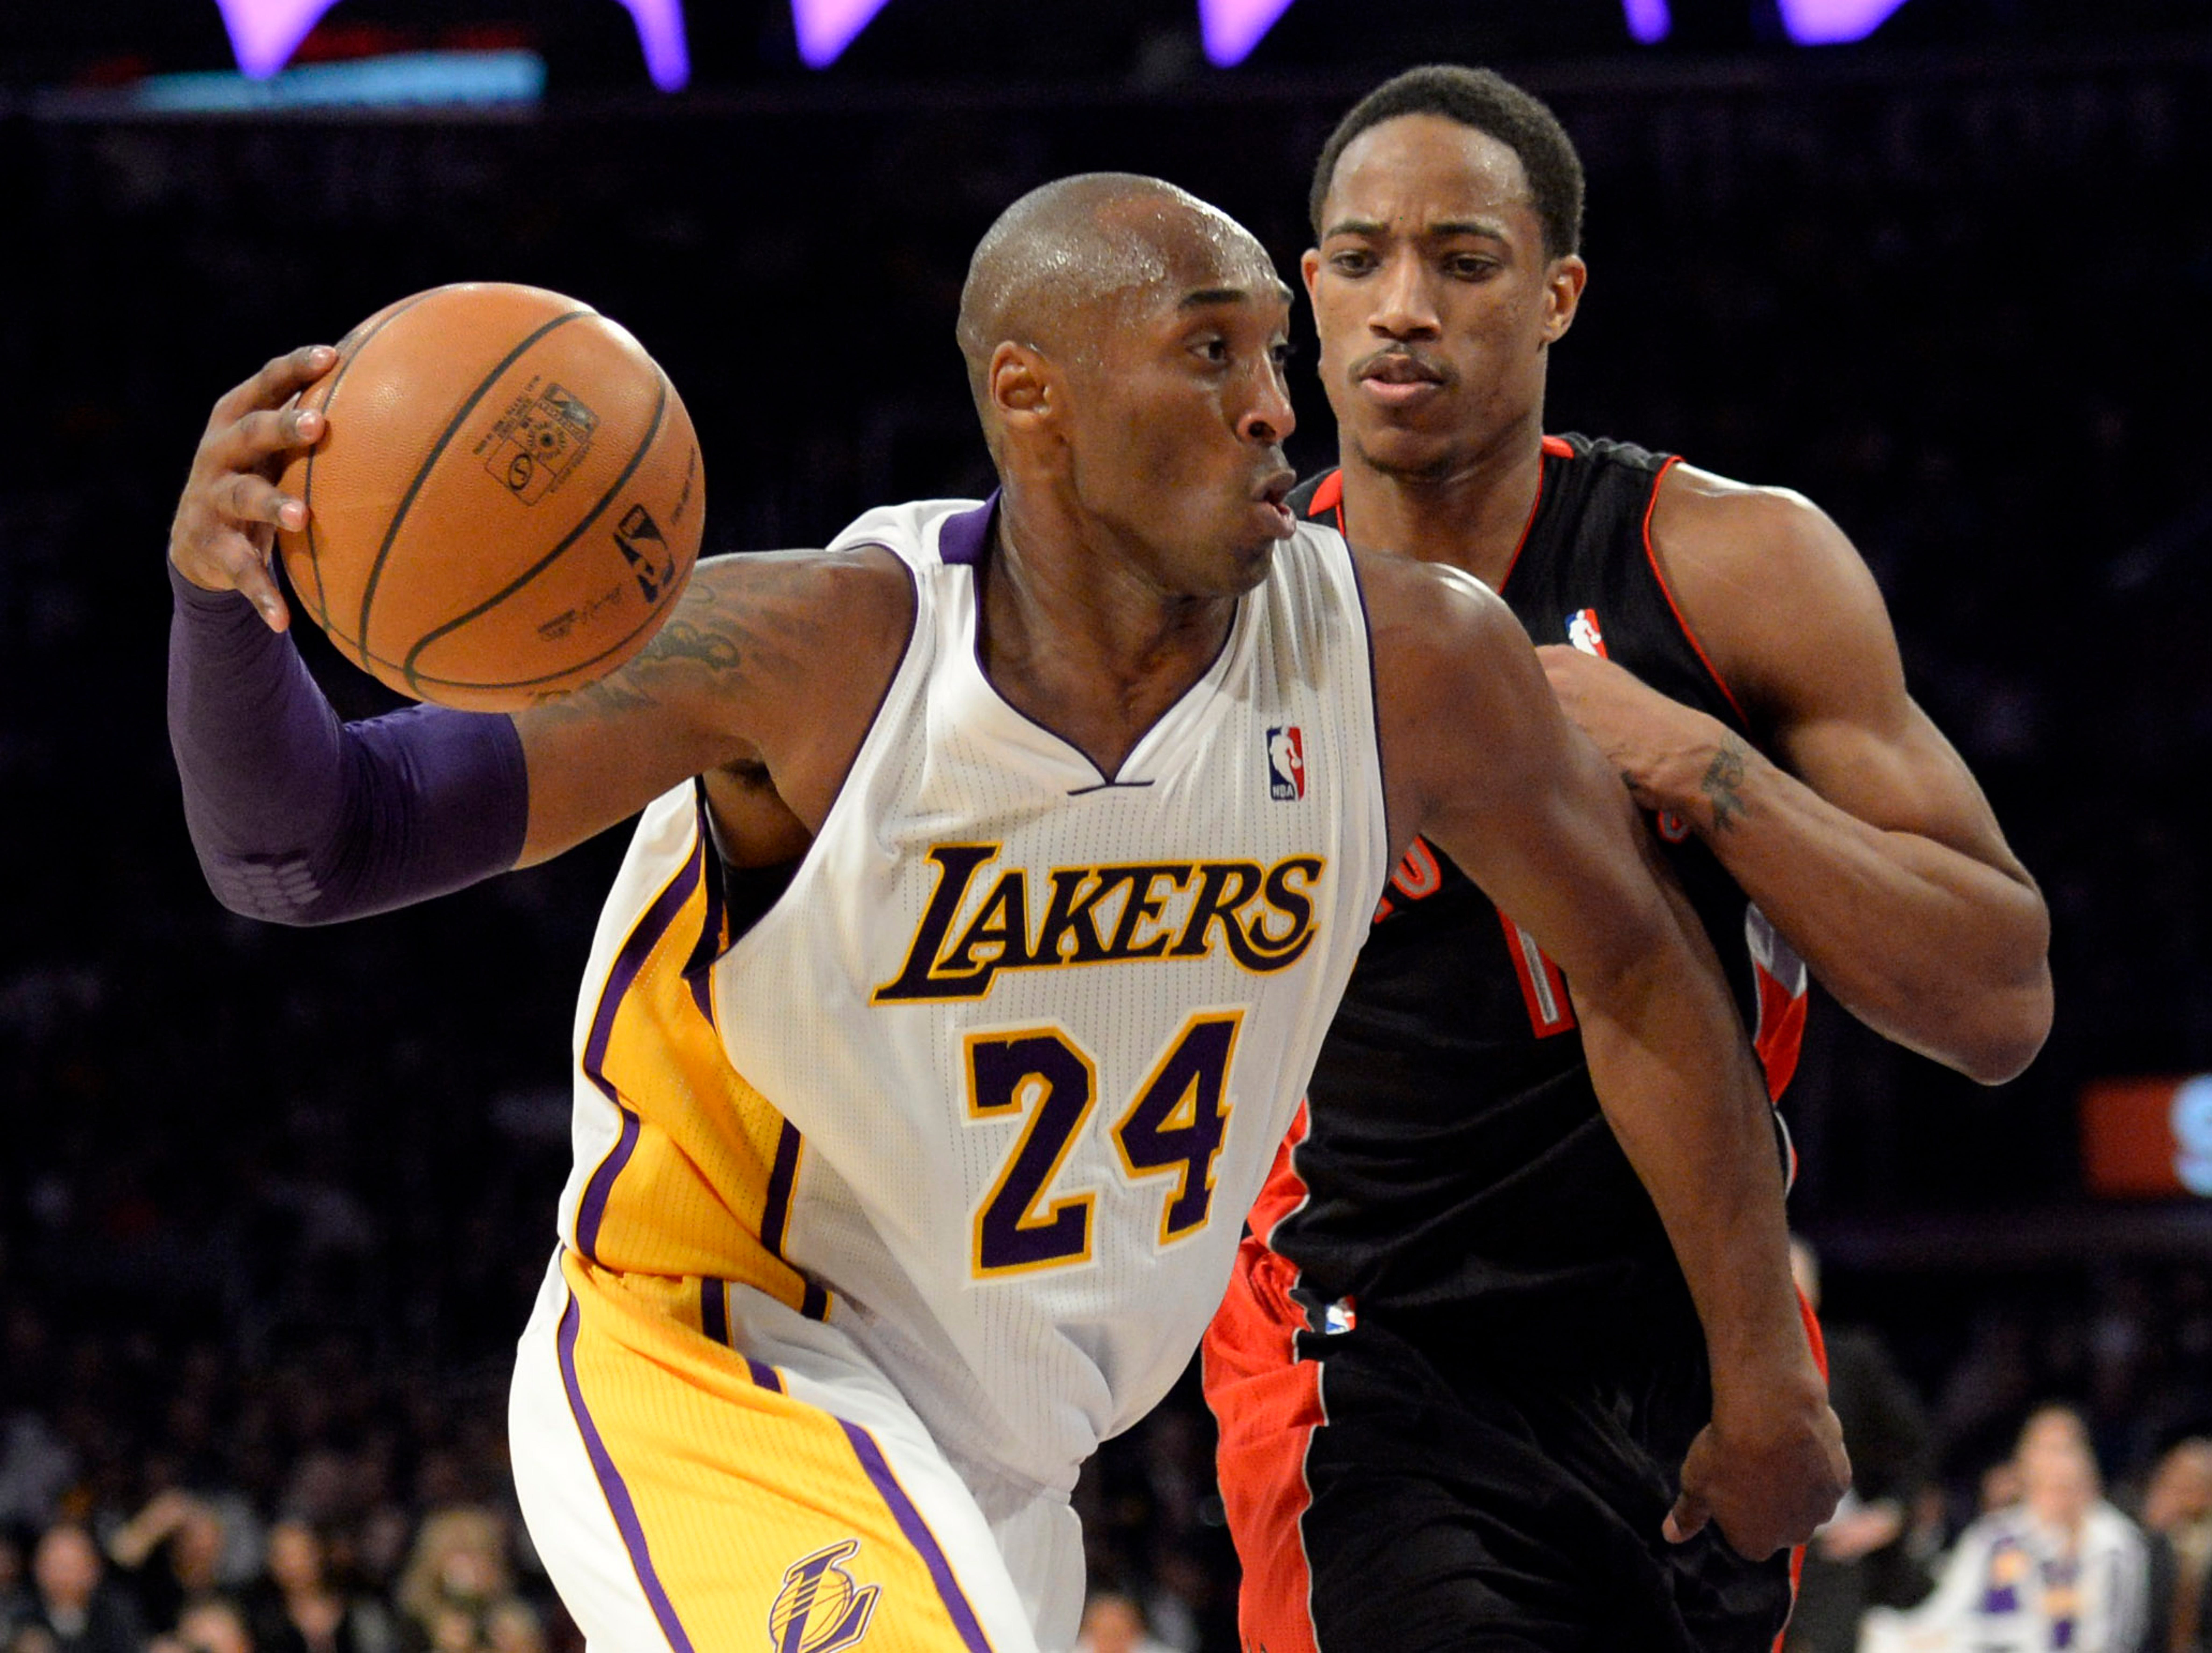 How did Kobe Bryant become good at basketball? Is he more